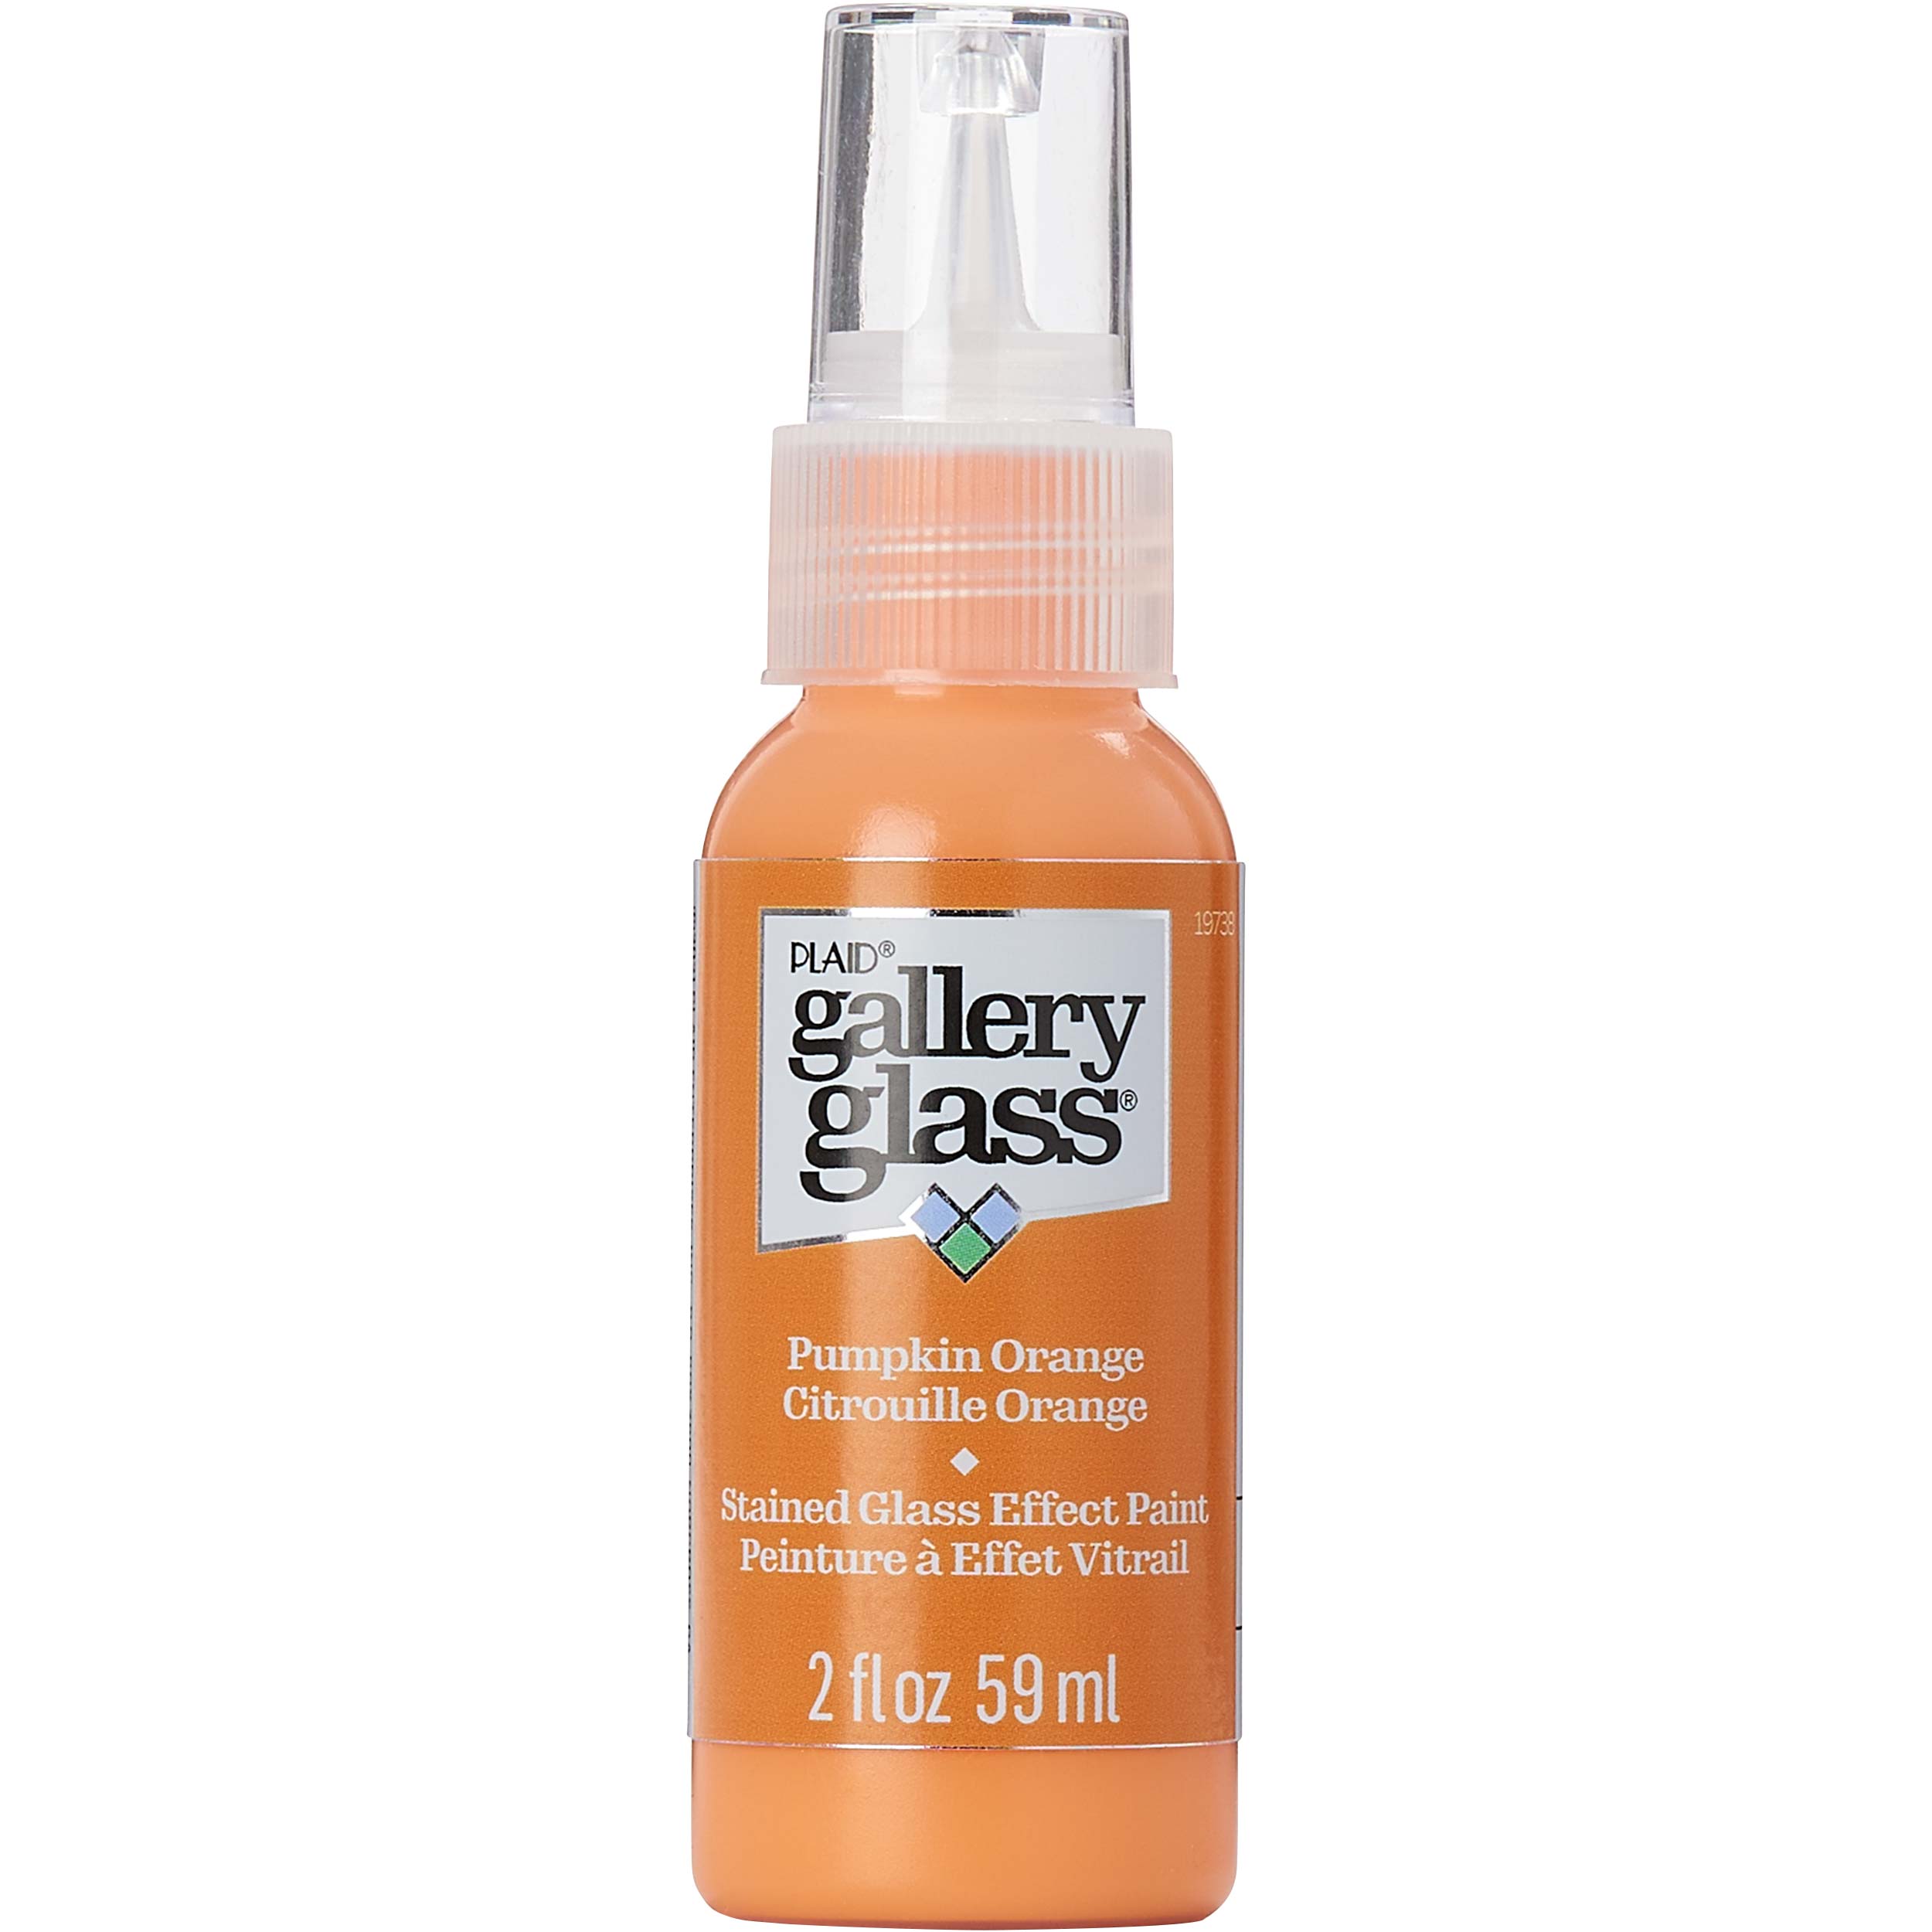 Gallery Glass ® Stained Glass Effect Paint - Pumpkin Orange, 2 oz. - 19738